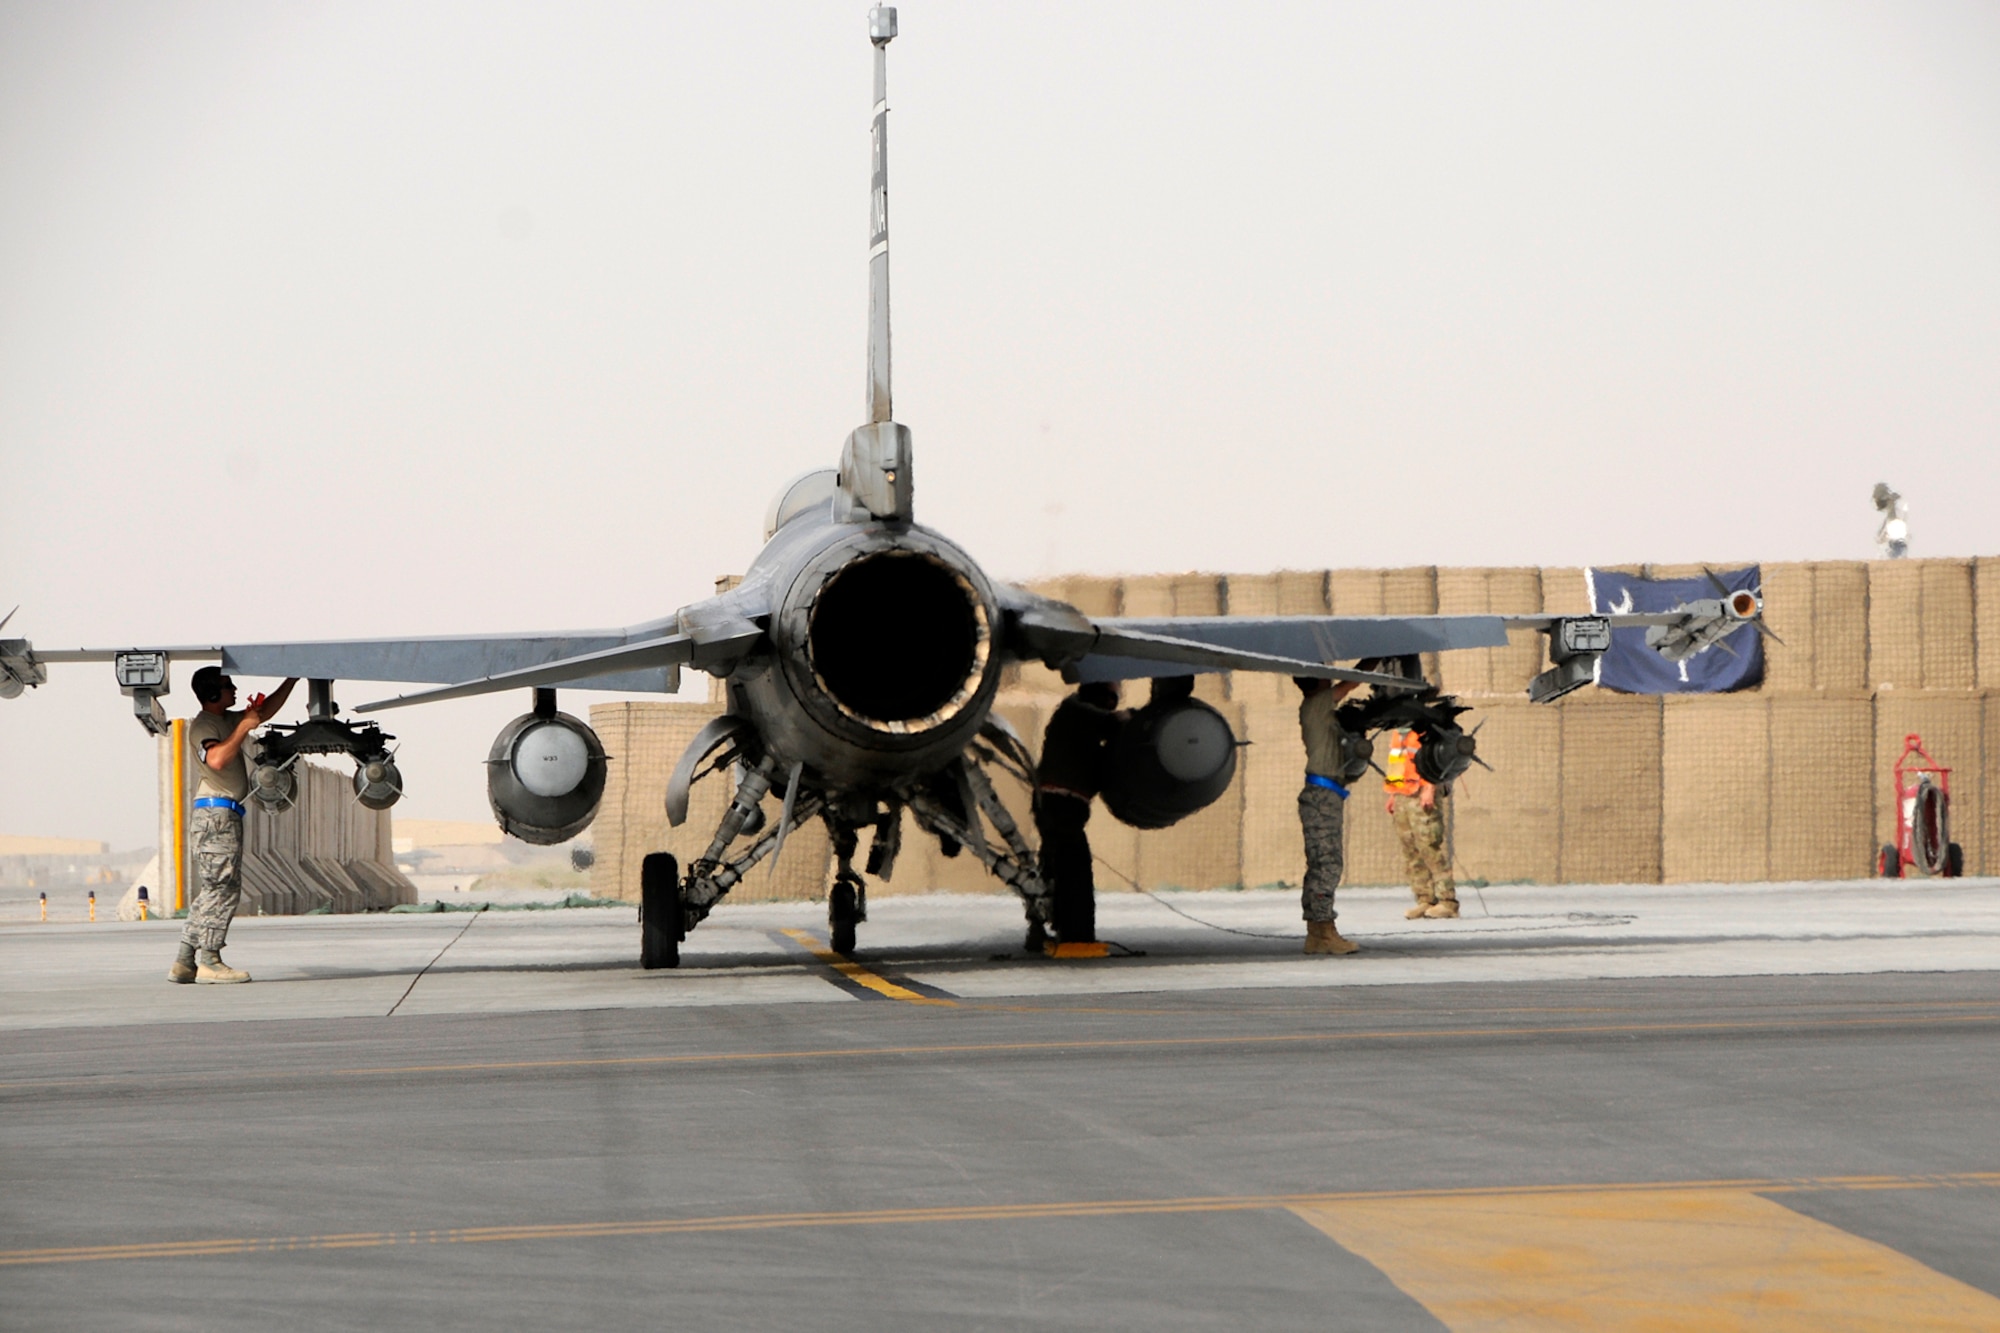 An F-16 with the 157th Expeditionary Fighter Squadron sits in the EOR at Kandahar Airfield as crew chiefs run through last minute checks as the jet readies for a day-time mission over Afghanistan on July 5, 2012.  Personnel are deployed from McEntire Joint National Guard Base, S.C., in support of Operation Enduring Freedom. Swamp Fox F-16's, pilots, and support personnel began their Air Expeditionary Force deployment in early April to take over flying missions for the air tasking order and provide close air support for troops on the ground in Afghanistan. (U.S. Air Force photo/Tech. Sgt. Stephen Hudson)